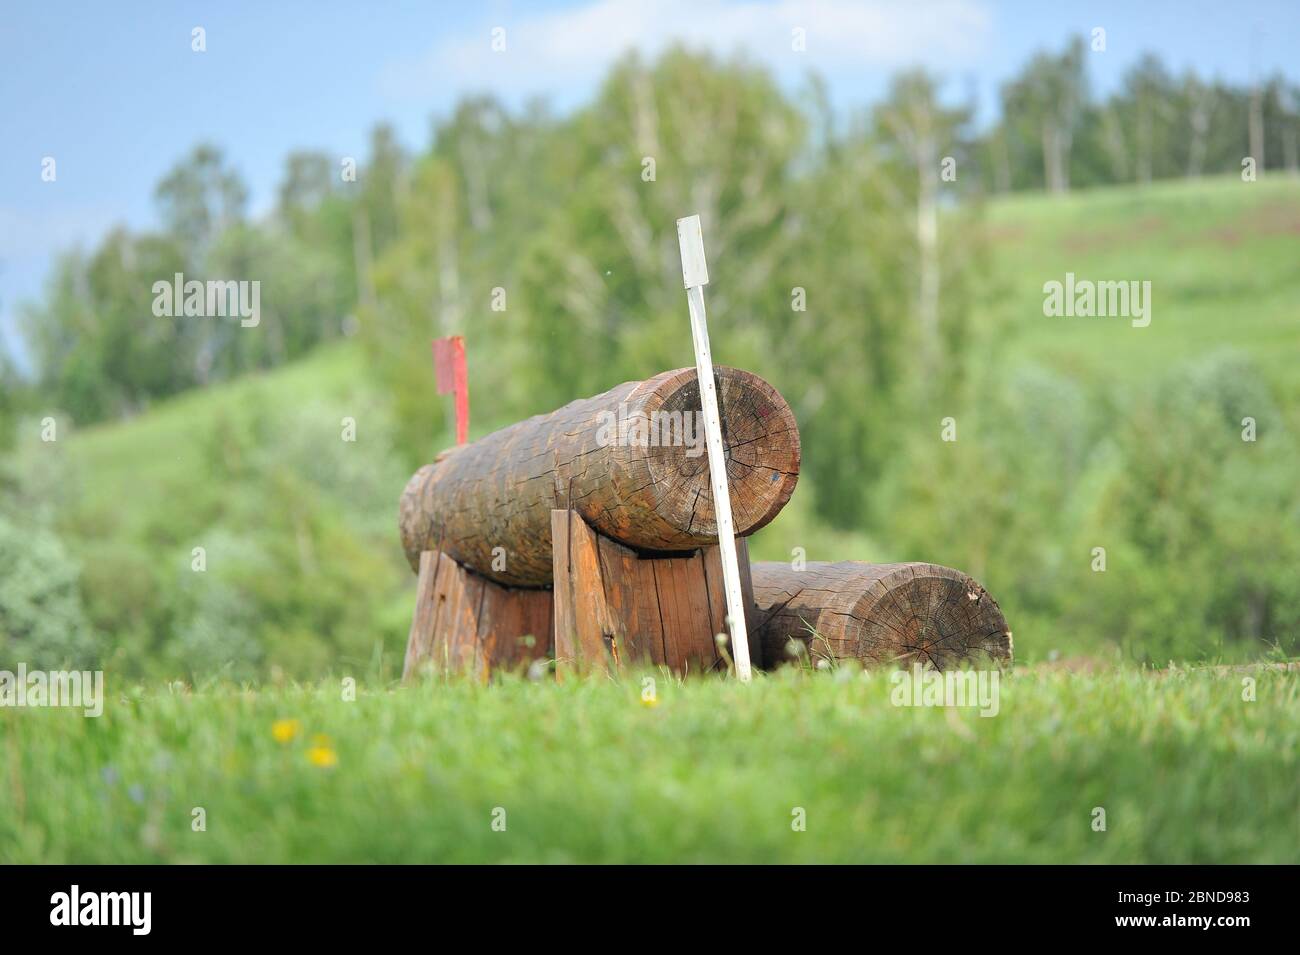 A cross-country a Log fences obstacles on a cross country course Stock Photo